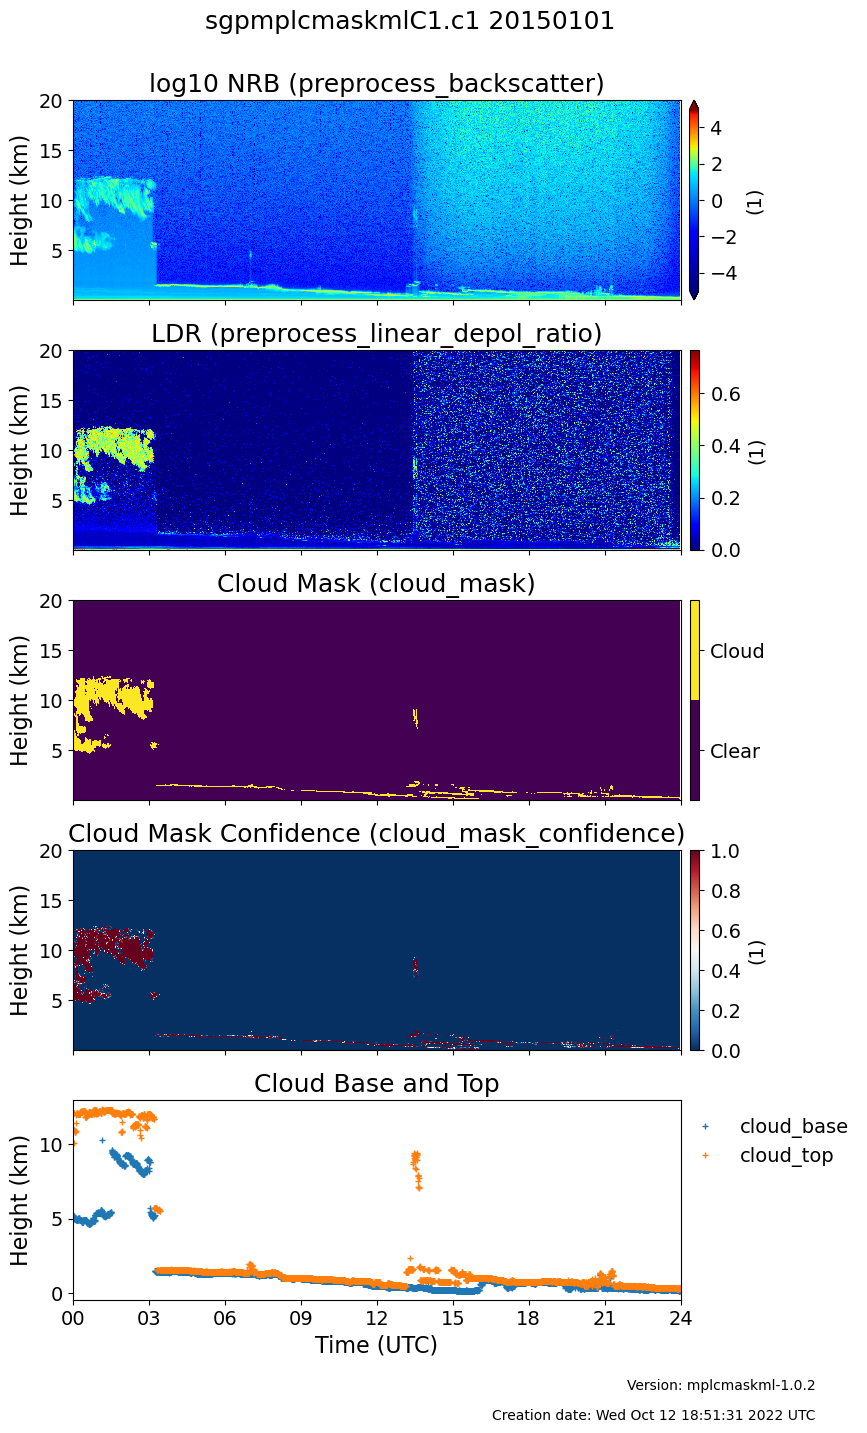 This sample quicklook plot from the Southern Great Plains atmospheric observatory shows the log of the normalized relative backscatter (log10 NRB), linear depolarization ratio (LDR), and cloud mask from the MPLCMASKML value-added product for January 1, 2015. In addition, the plot contains the machine learning model’s confidence in its prediction, and cloud base and cloud top.